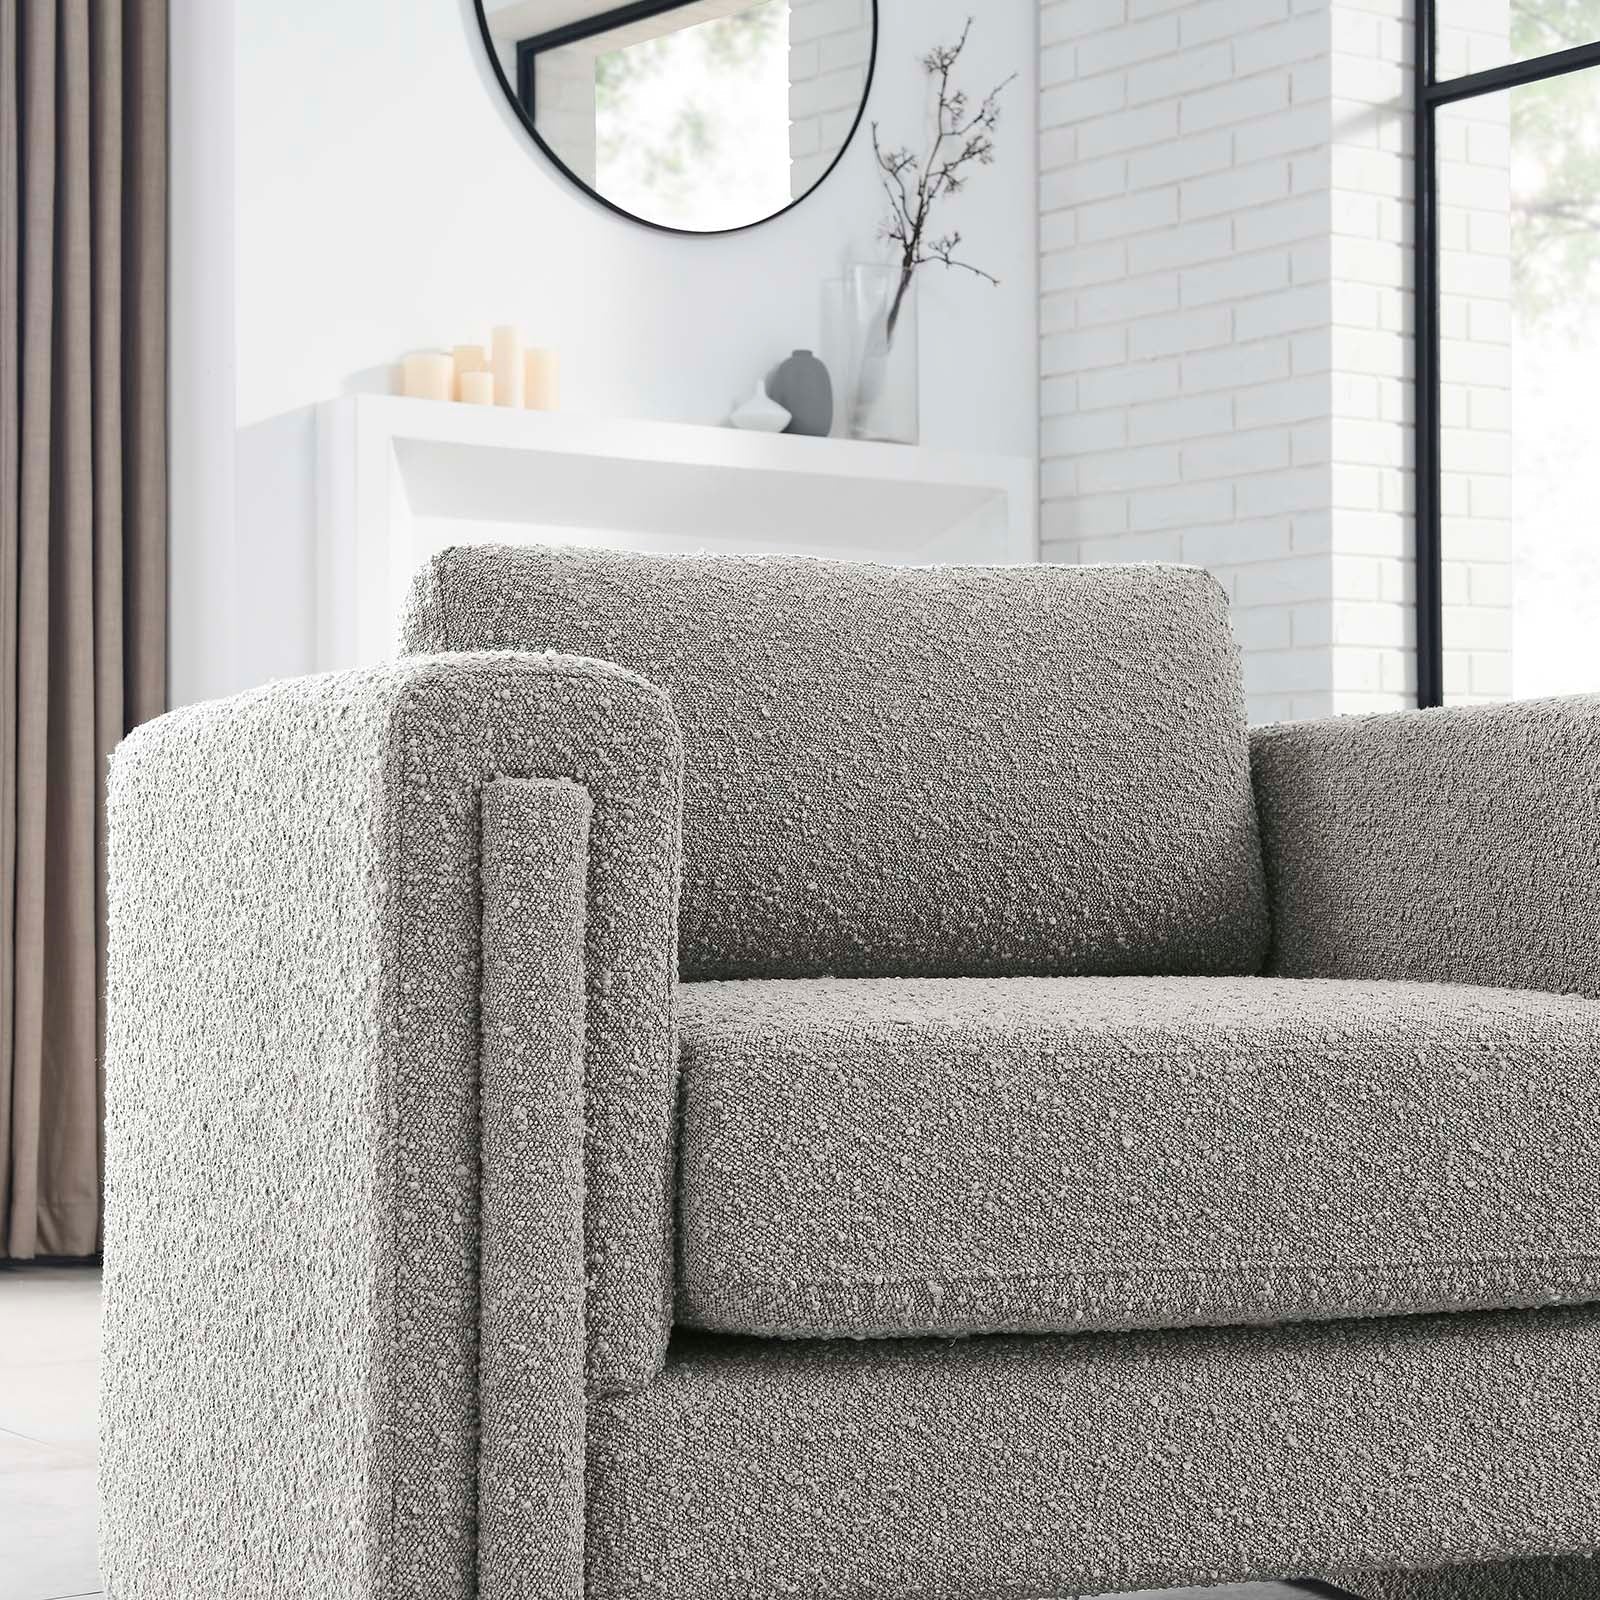 Visible Boucle Fabric Armchair